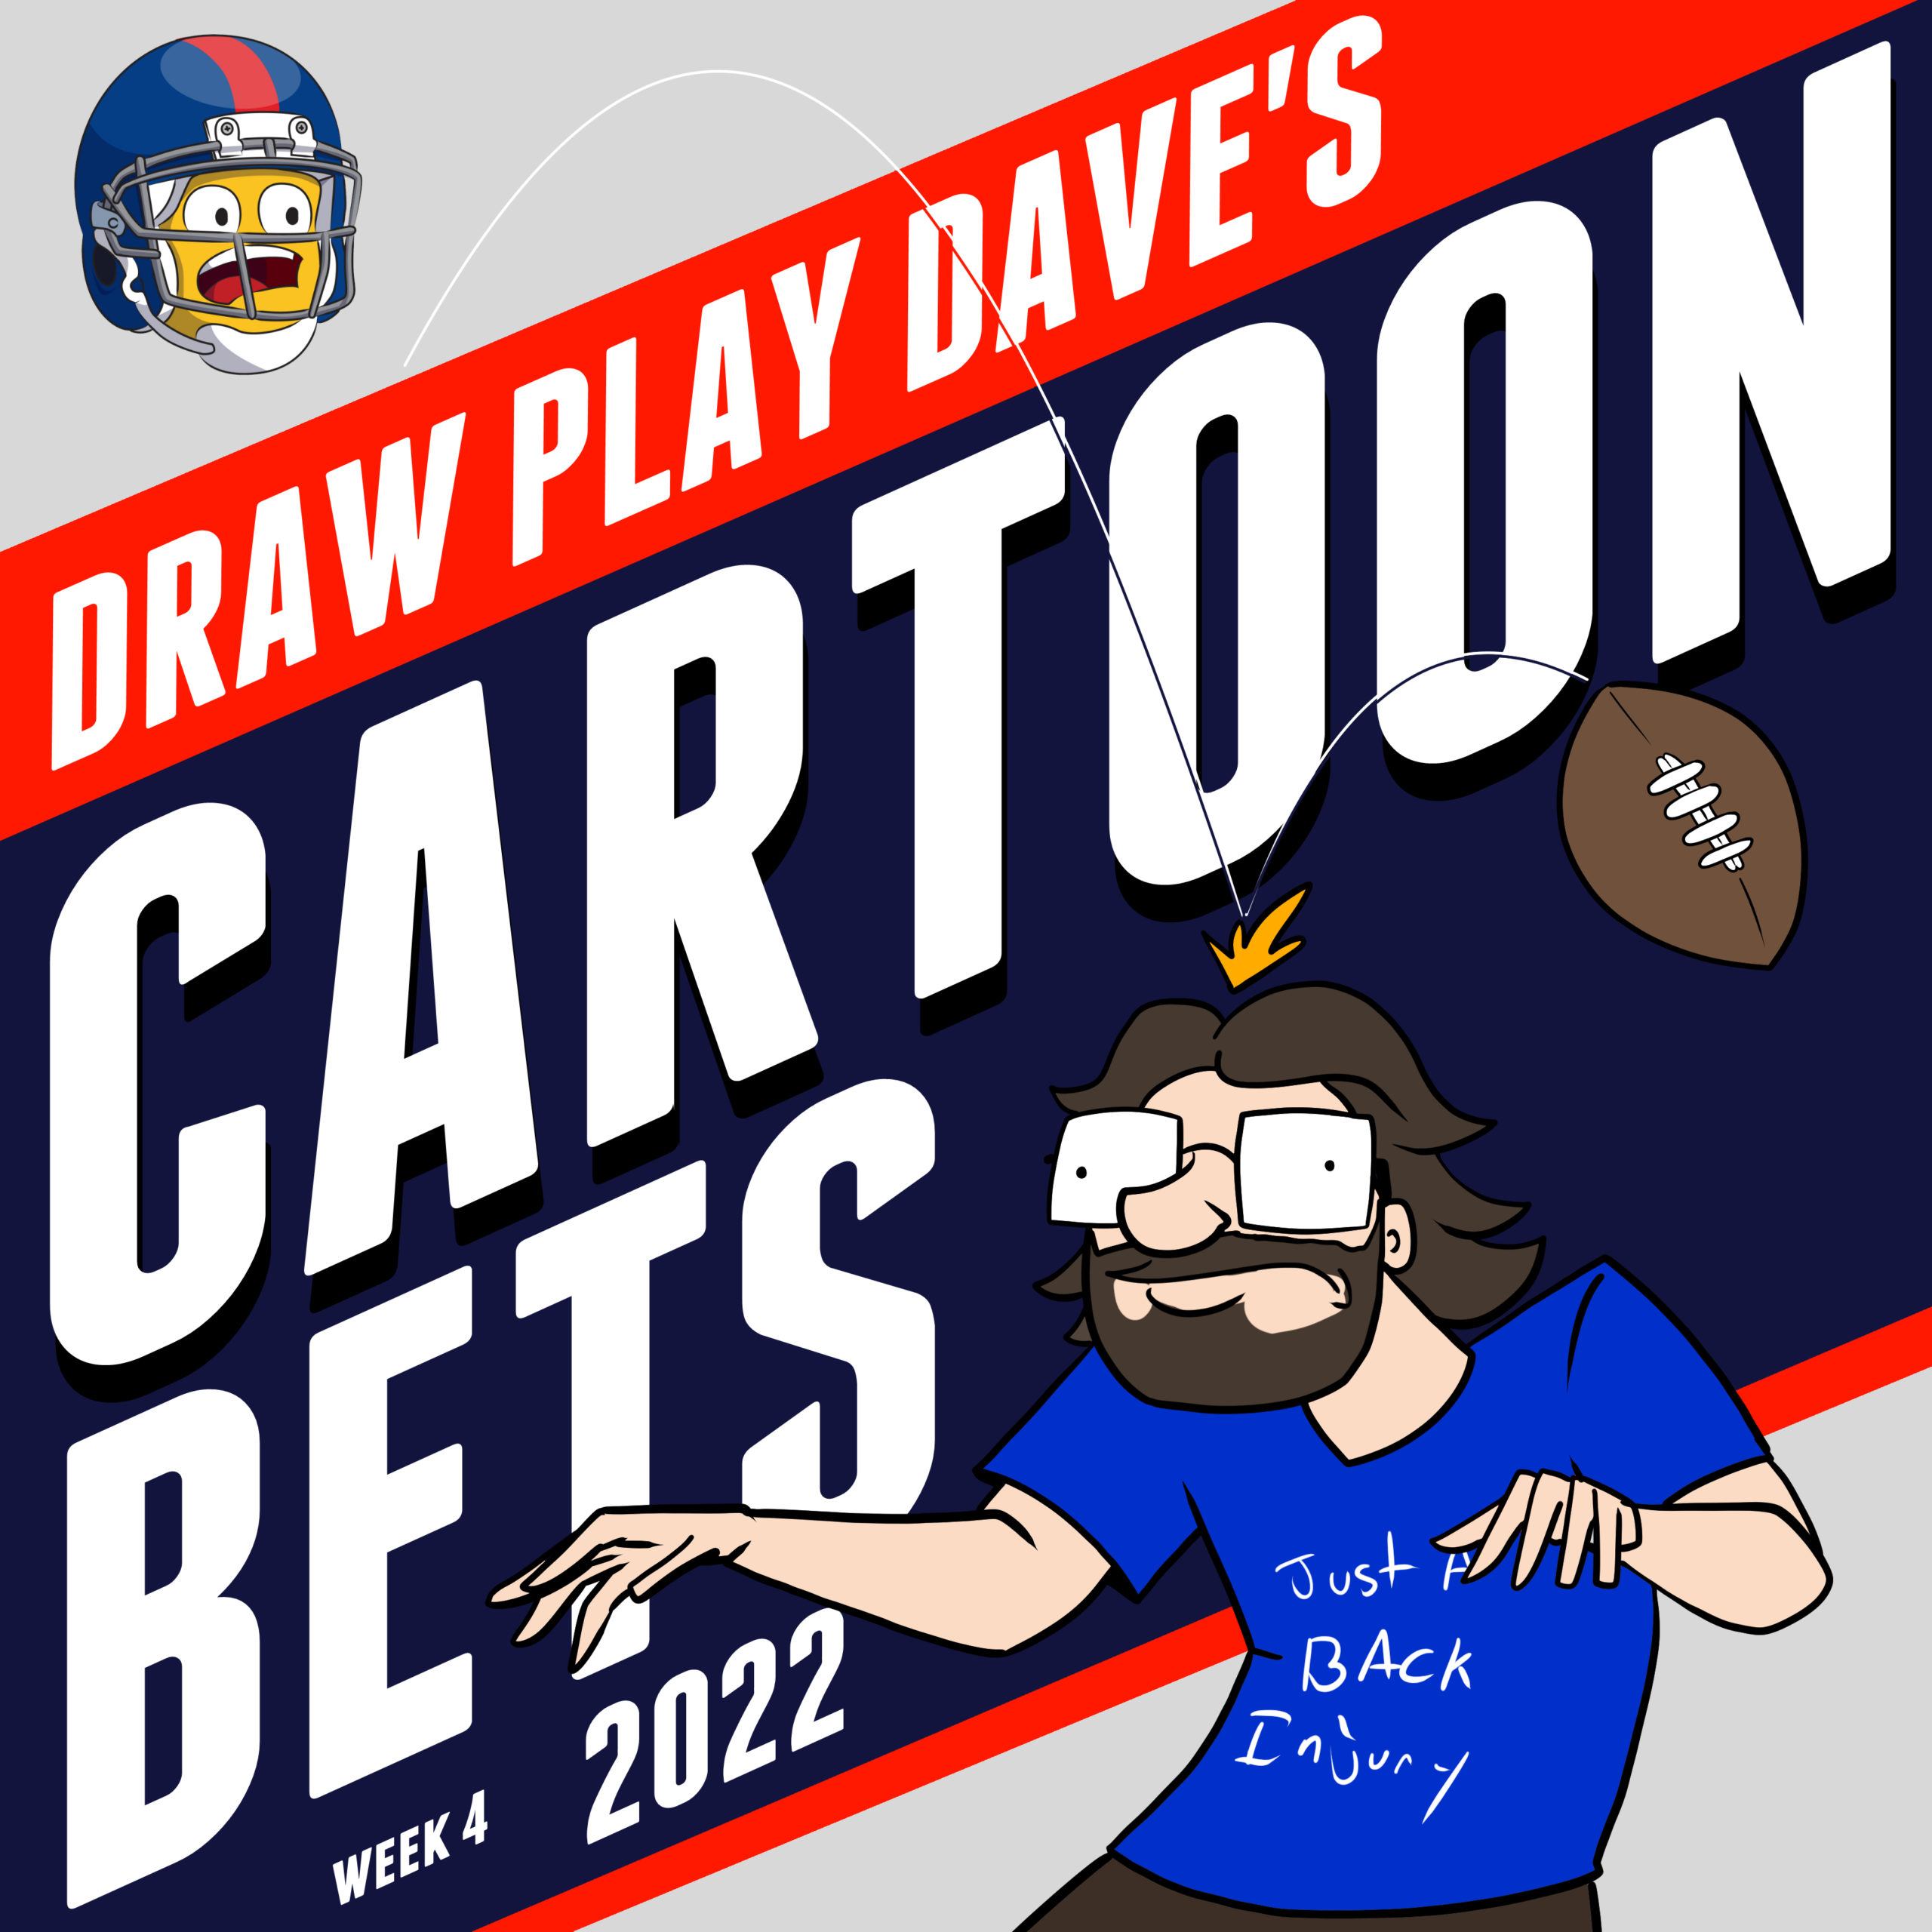 CARTOON BETS WEEK 4 – It’s Just A Back Injury